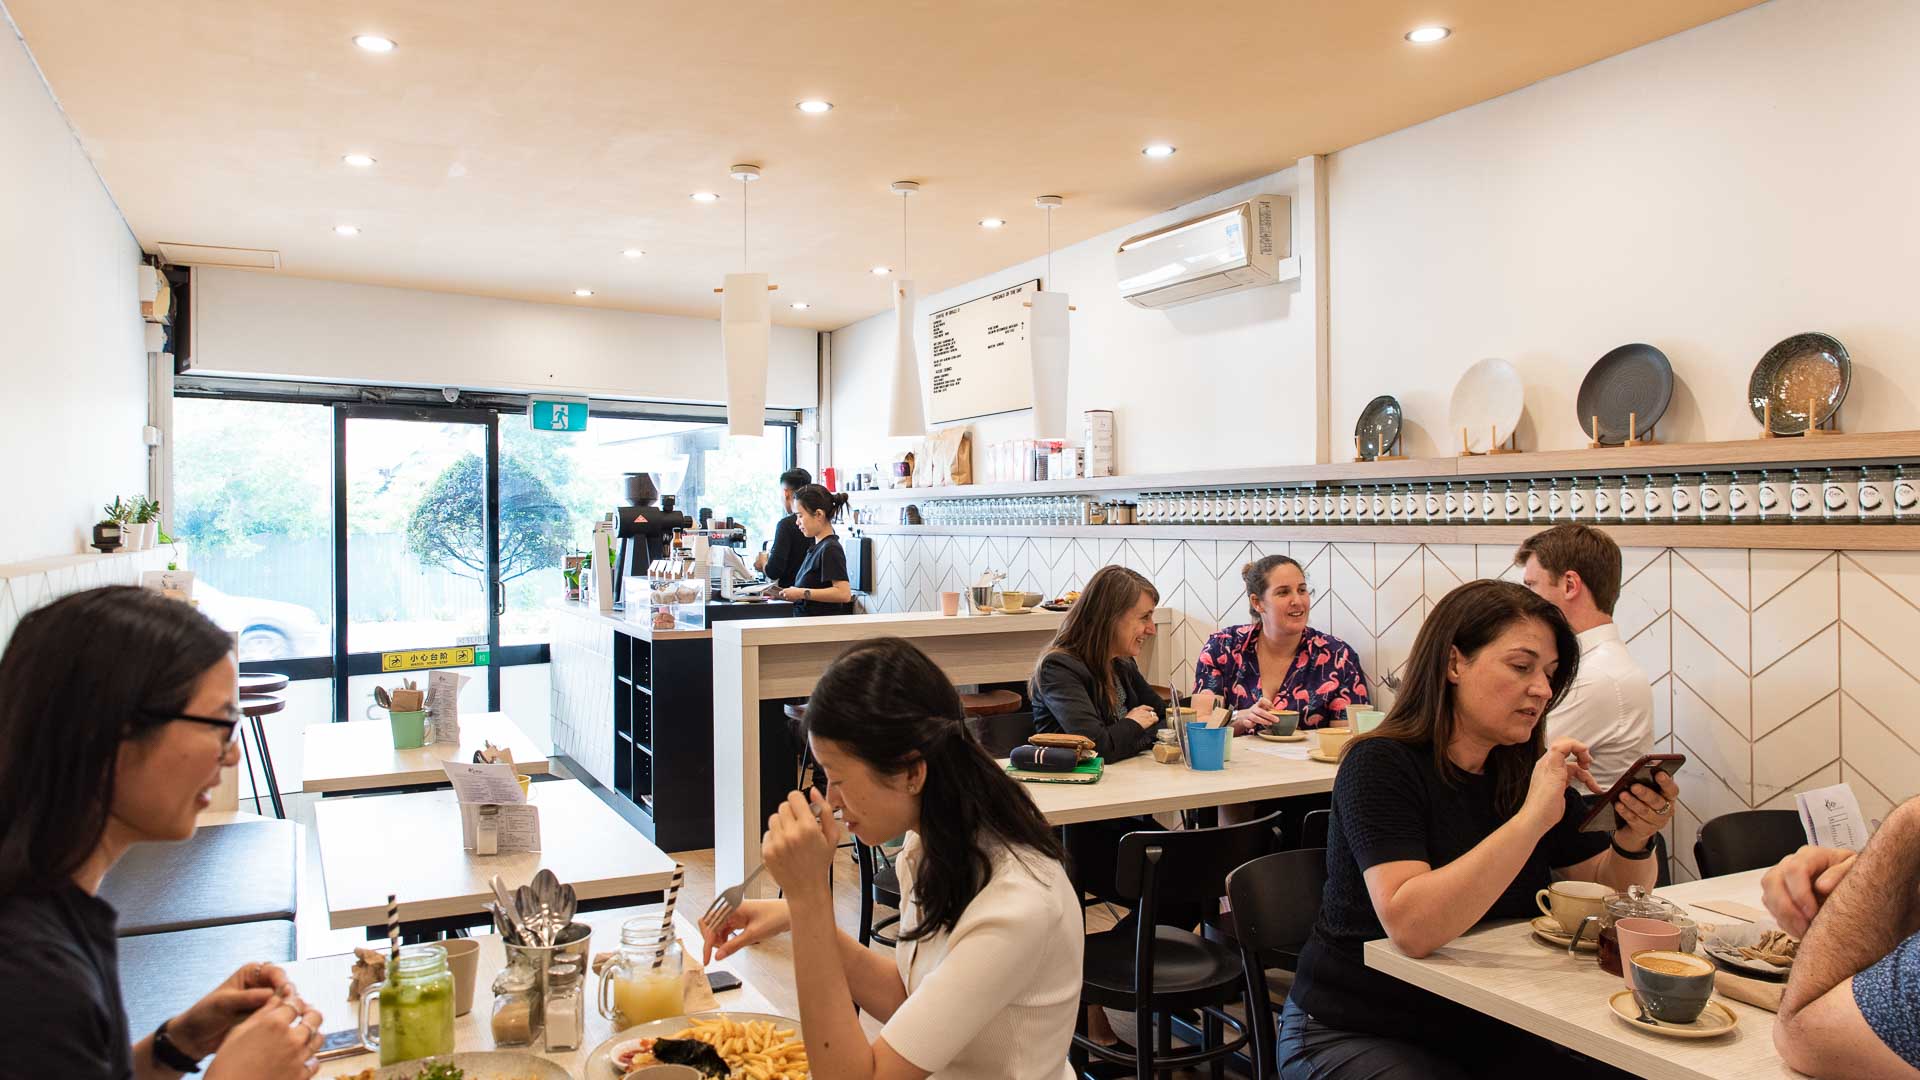 Koku Culture Is Ashfield's Japanese Cafe and Miso Shop Serving Up Fluffy Matcha Pancakes